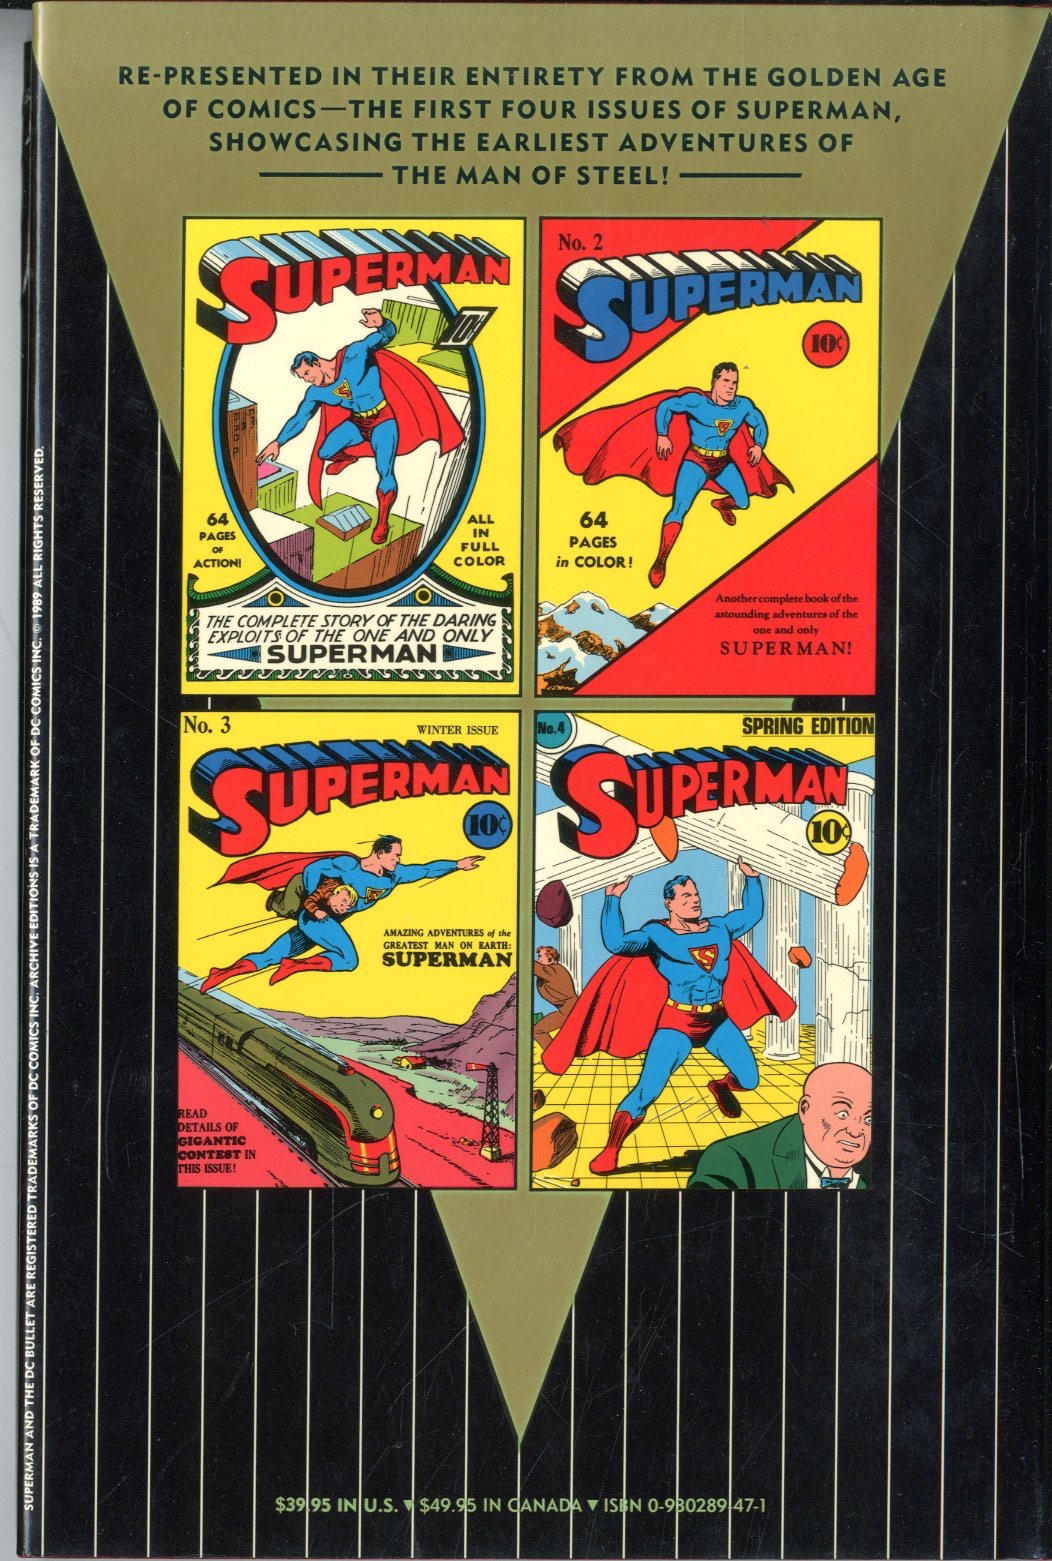 Archive Editions Superman - 12828